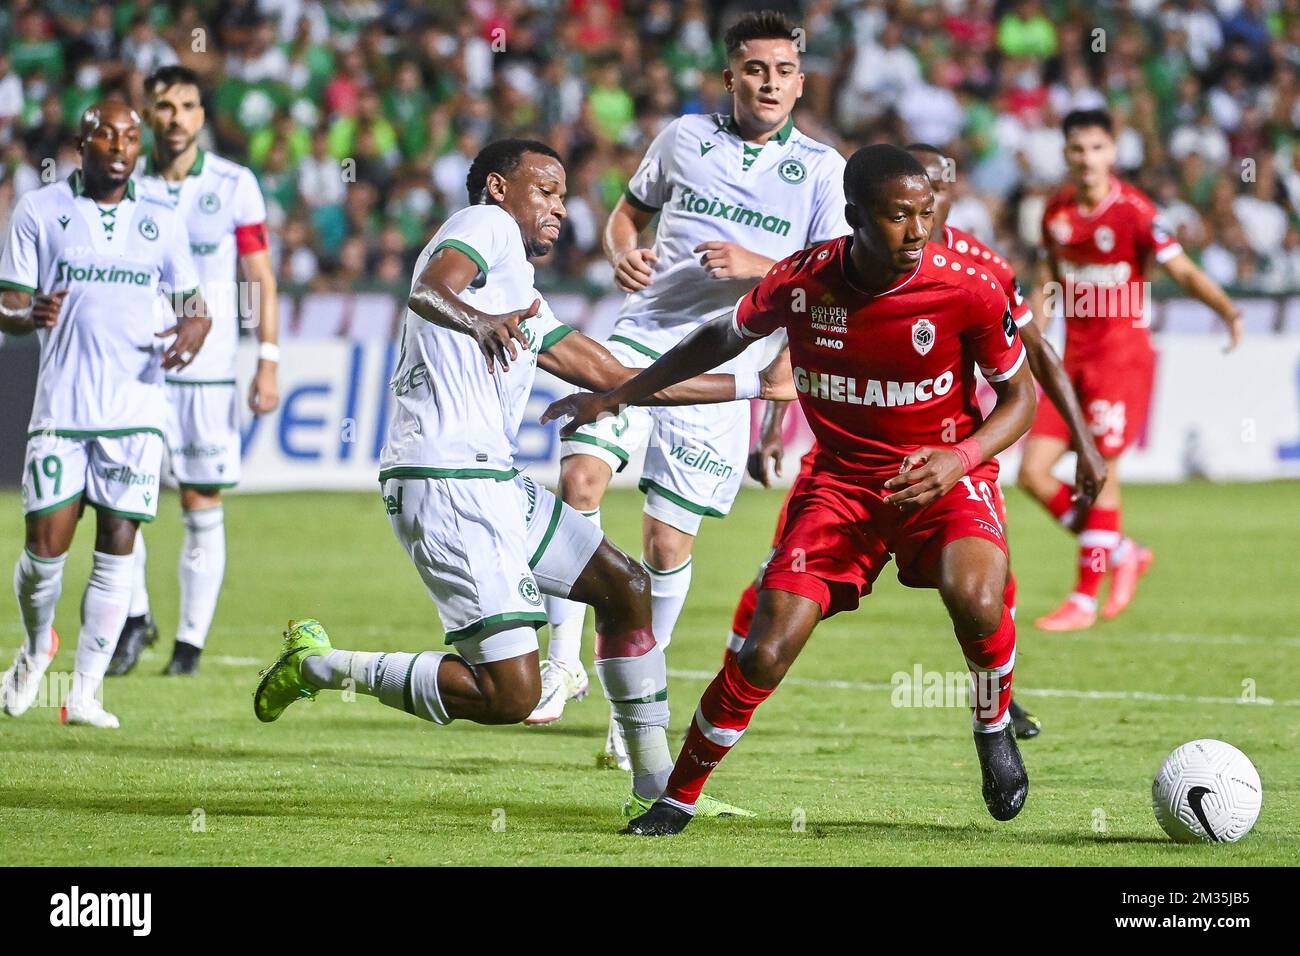 Omonoia's Shehu Abdullahi and Antwerp's Michel Ange Balikwisha fight for the ball during the match between Belgian soccer team Royal Antwerp FC and Omonia Nicosia, the first leg of the play-off for the Europea League competition, in Nicosia, Cyprus, Thursday 19 August 2021. BELGA PHOTO LAURIE DIEFFEMBACQ Stock Photo